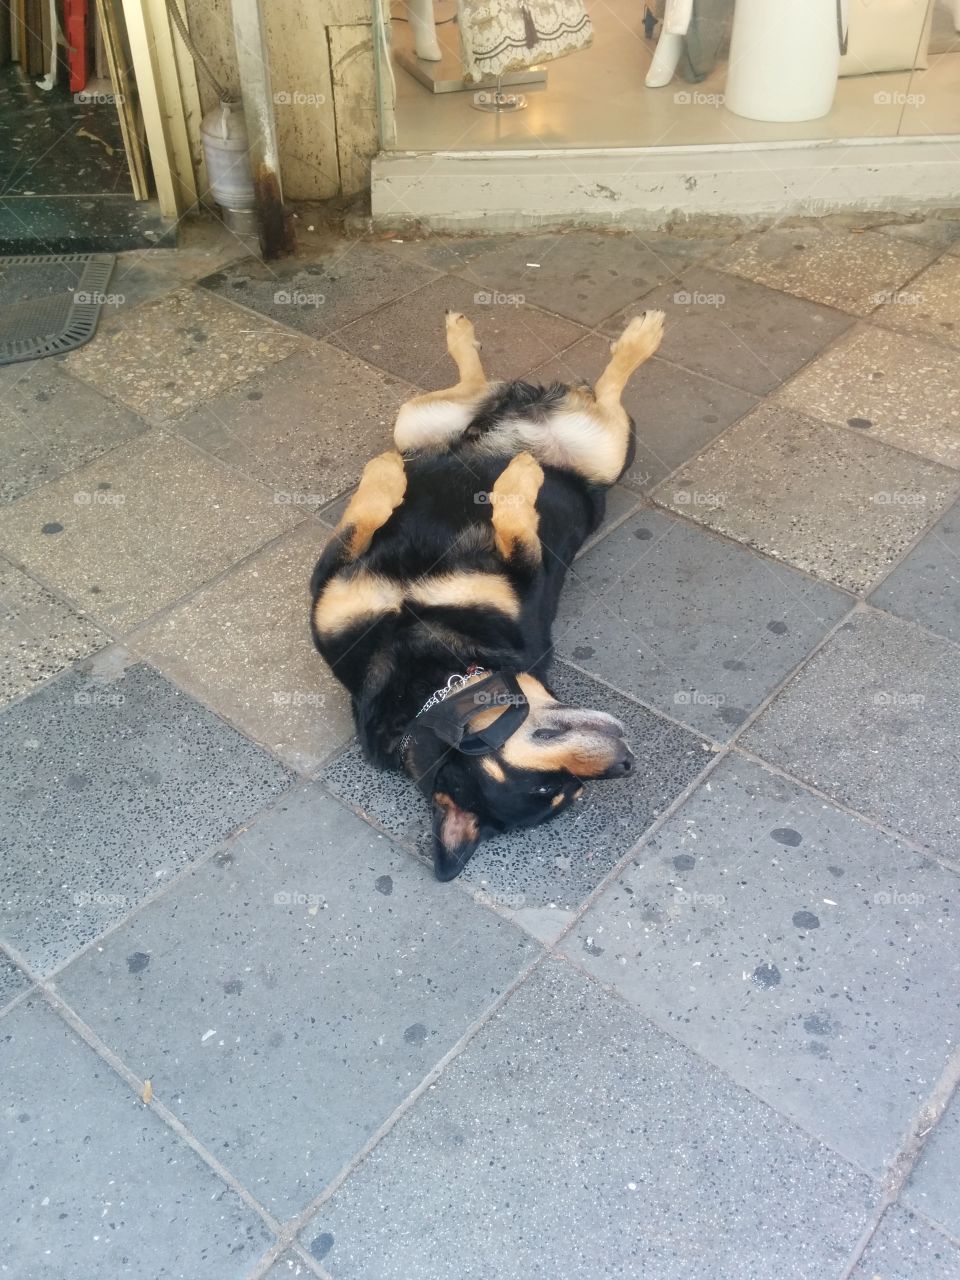 Tough Day at the Office. This Rottweiler hangs out in front of his owner's shop everyday on Dizengoff St. in Tel Aviv.  Nothing bothers it!